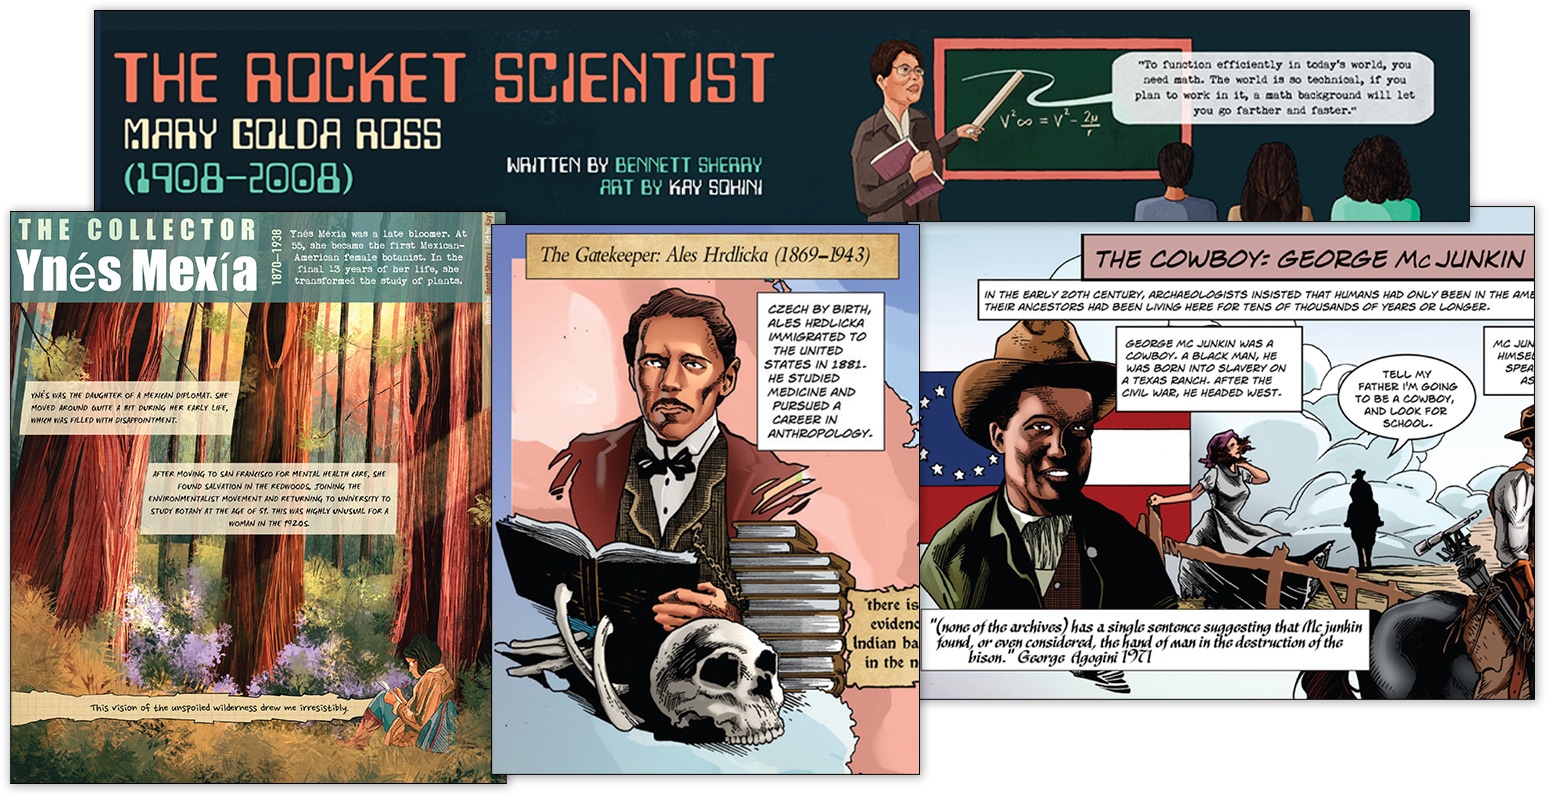 A collage of images from a comic strip about rocket scientist Ynes Mexia.